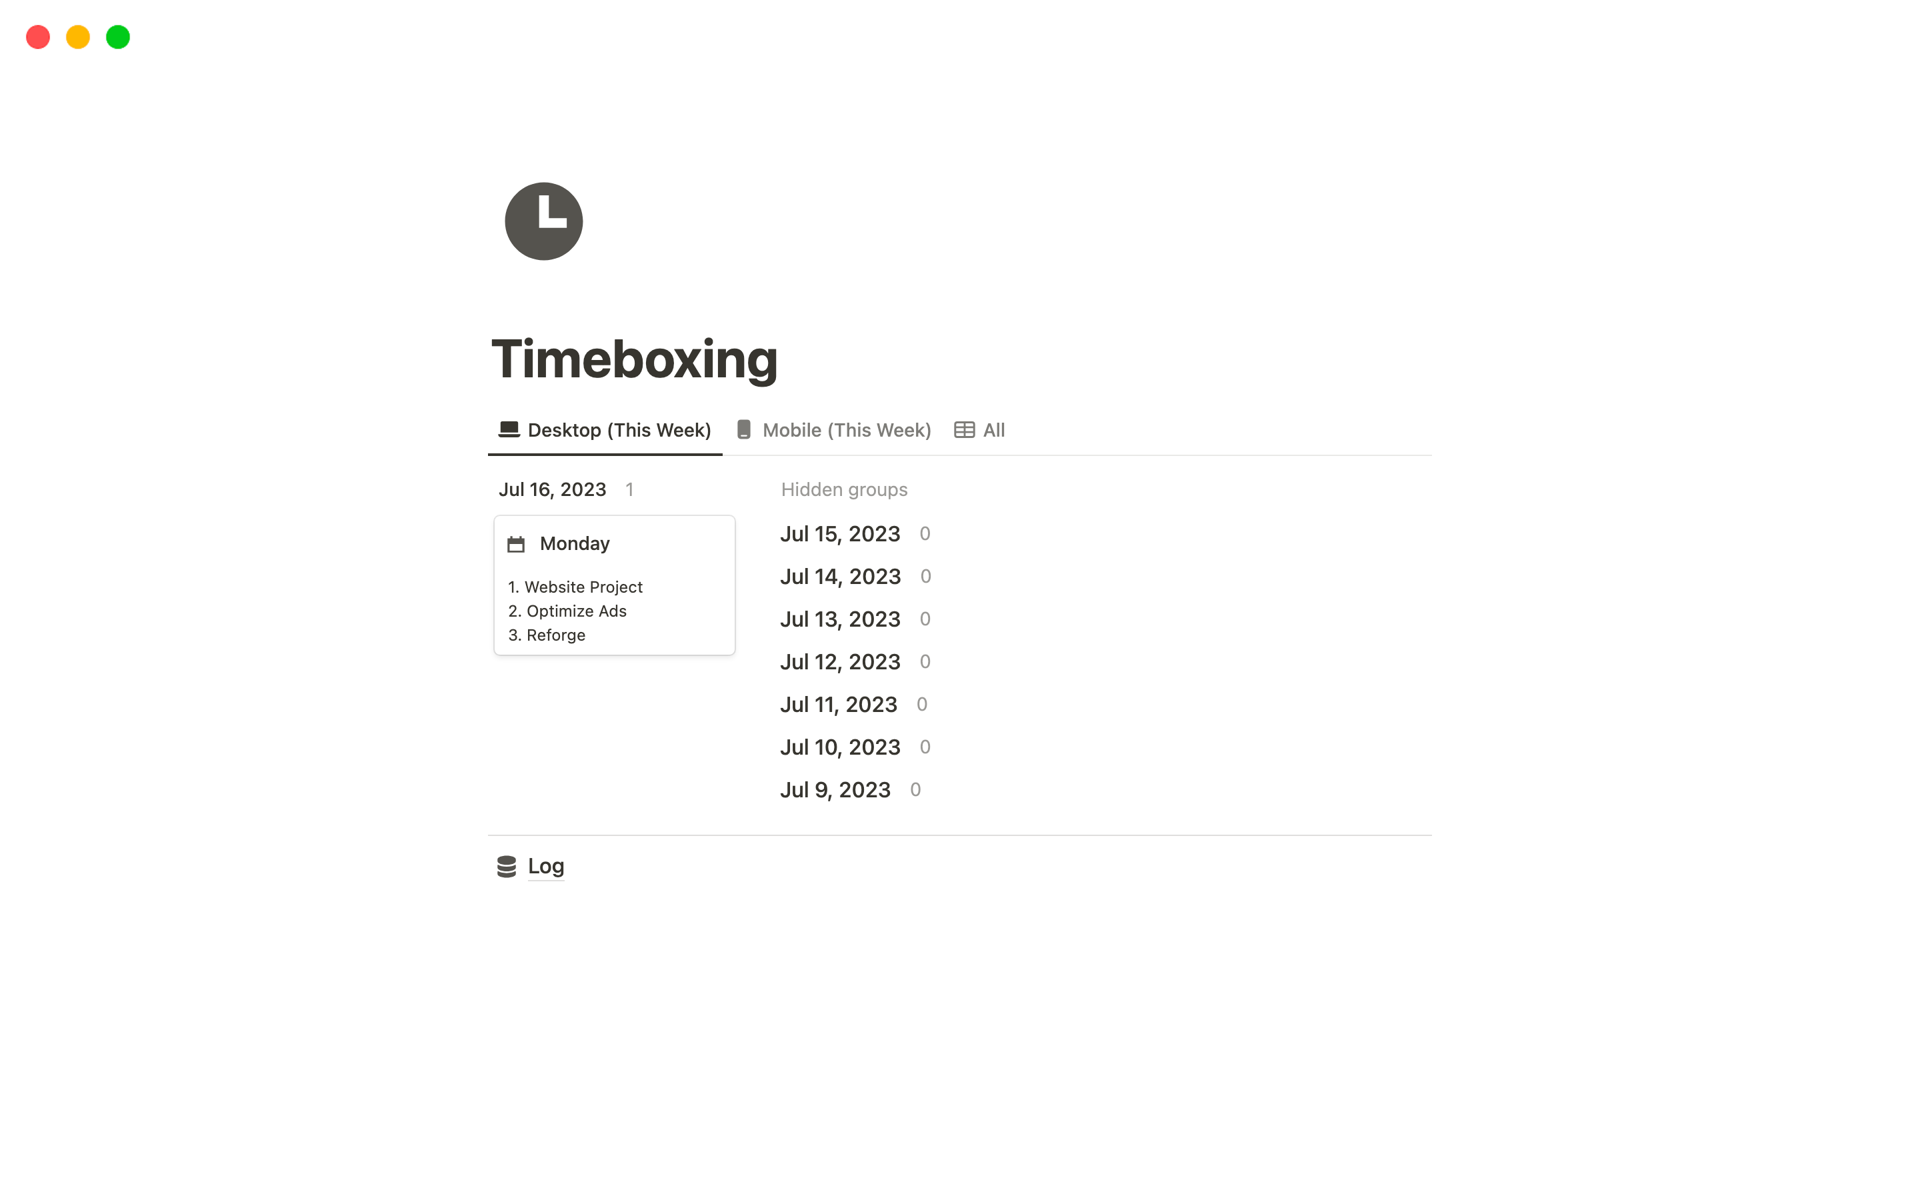 Stop feeling overwhelmed and stressed. Start being more focused and productive with this Timeboxing Template.